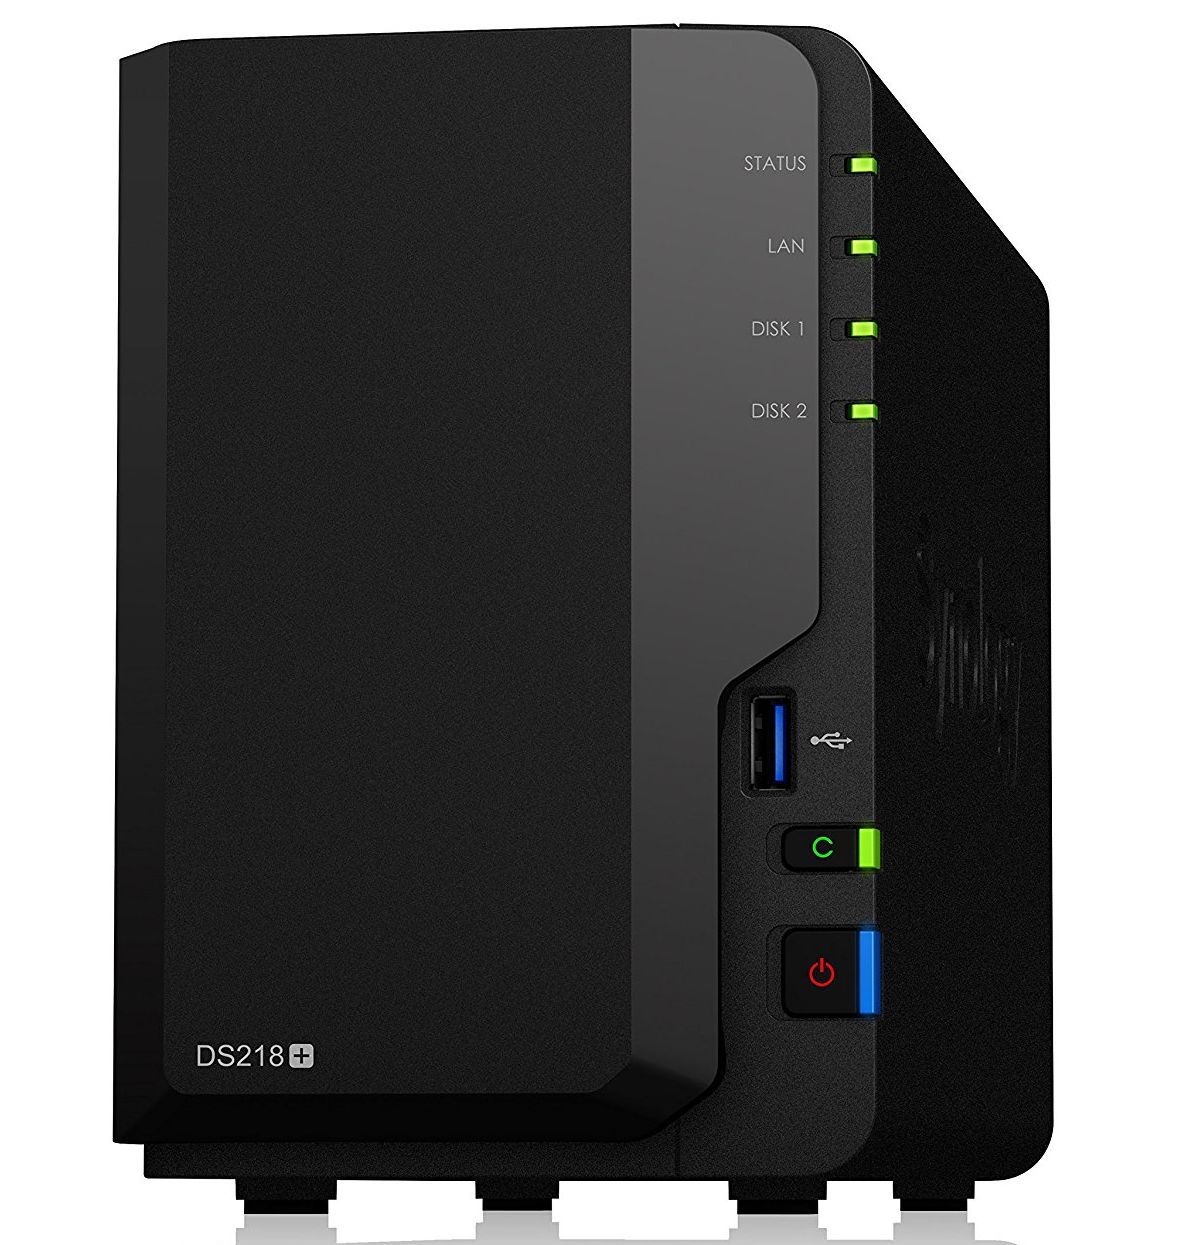 Synology DS218+ product image